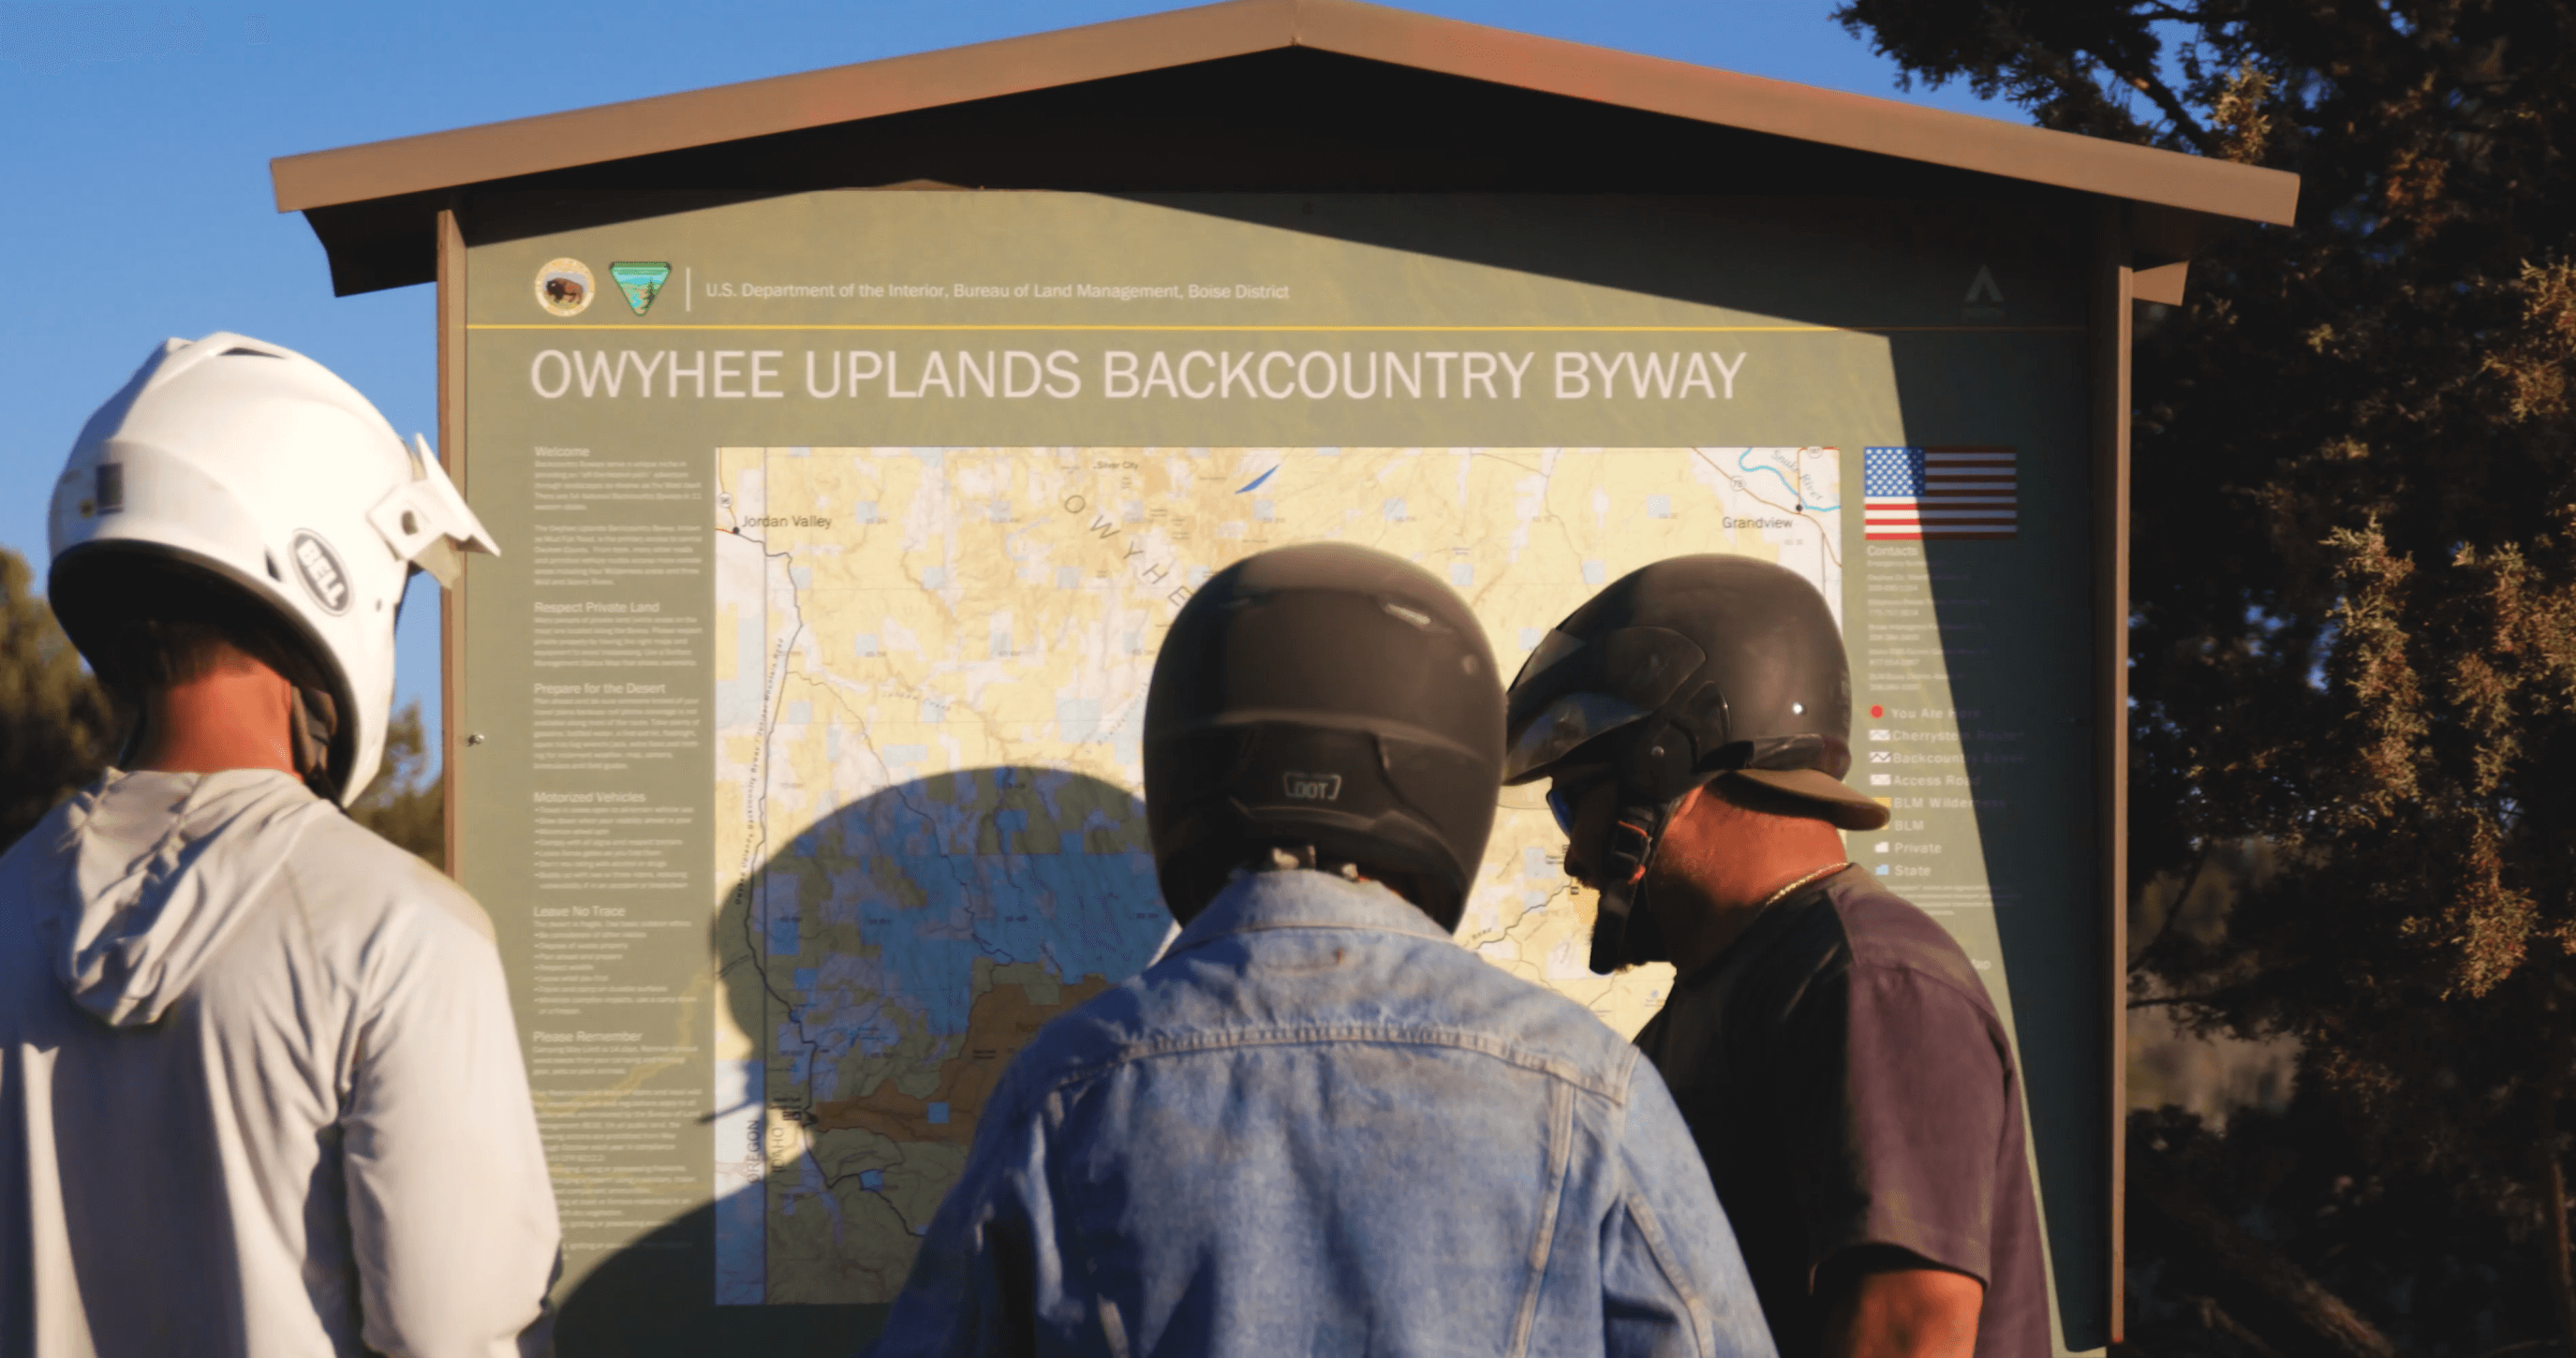 three people wearing helmets, looking at a Owyhee Uplands Backcountry Byway sign